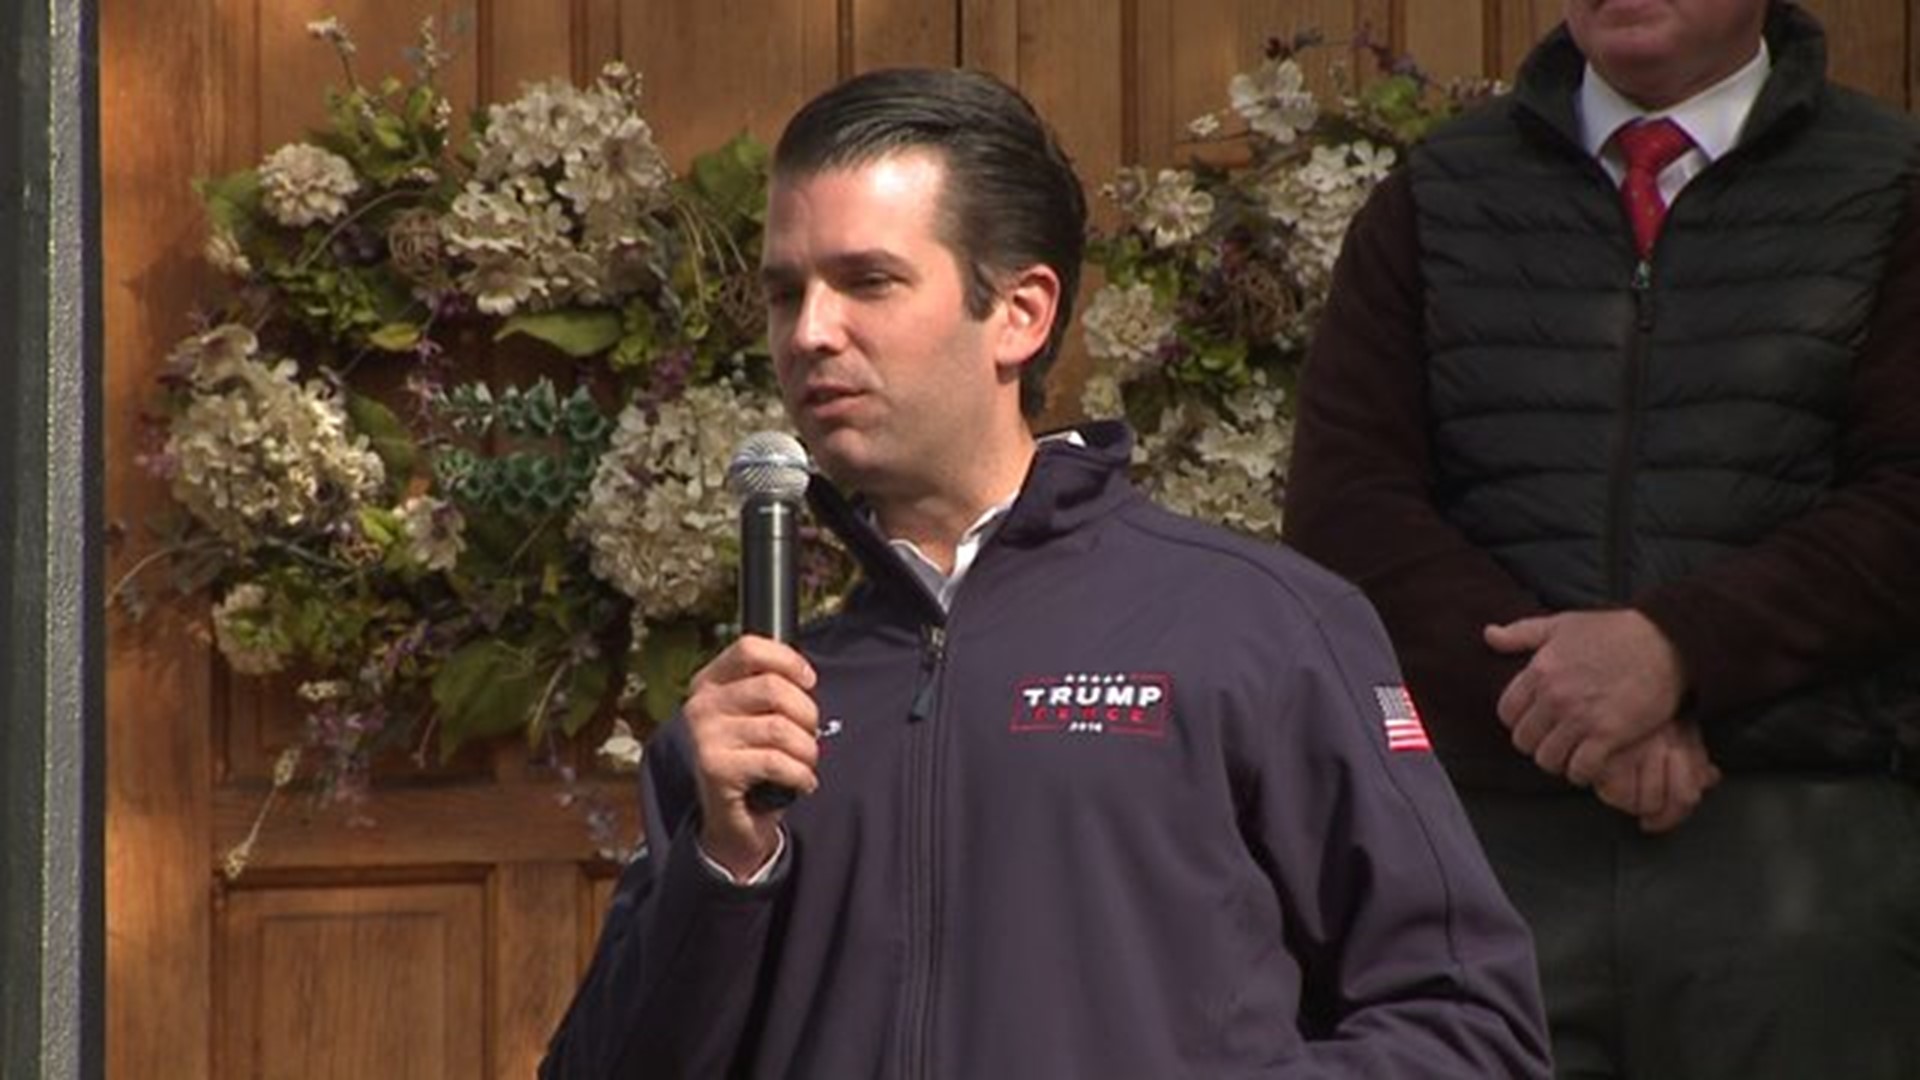 Donald Trump Jr makes final Iowa pit stop in Burlington to rally Trump supporters